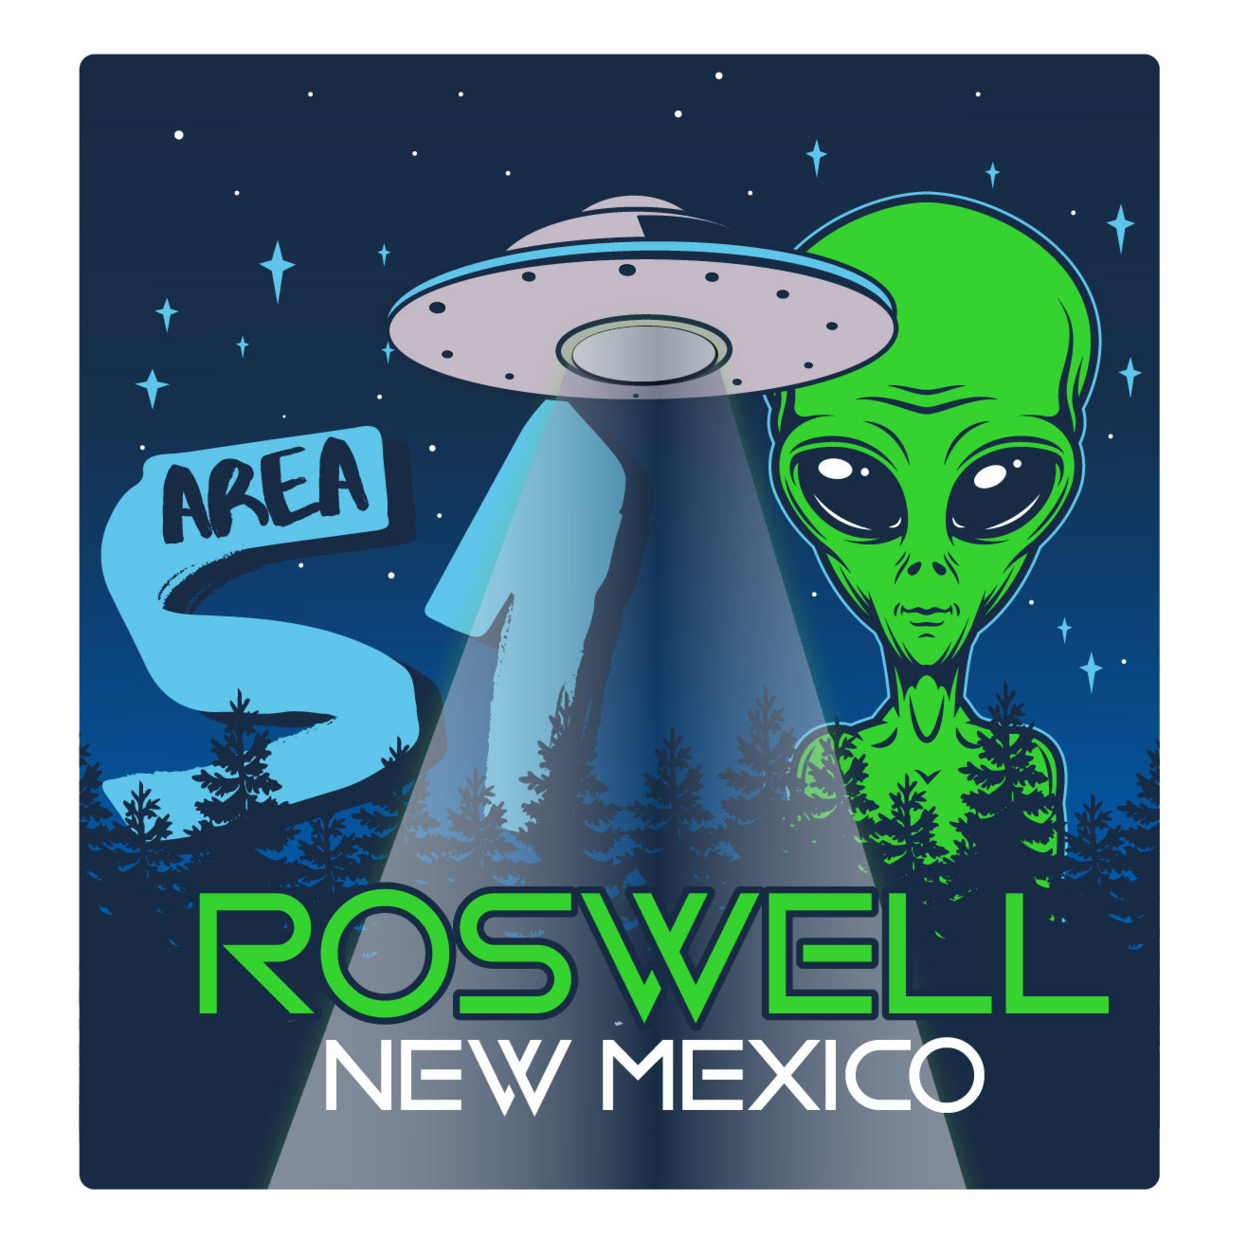 Roswell New Mexico Souvenir UFO Spaceship Area 51 Alien Decal Sticker - 3 Inch